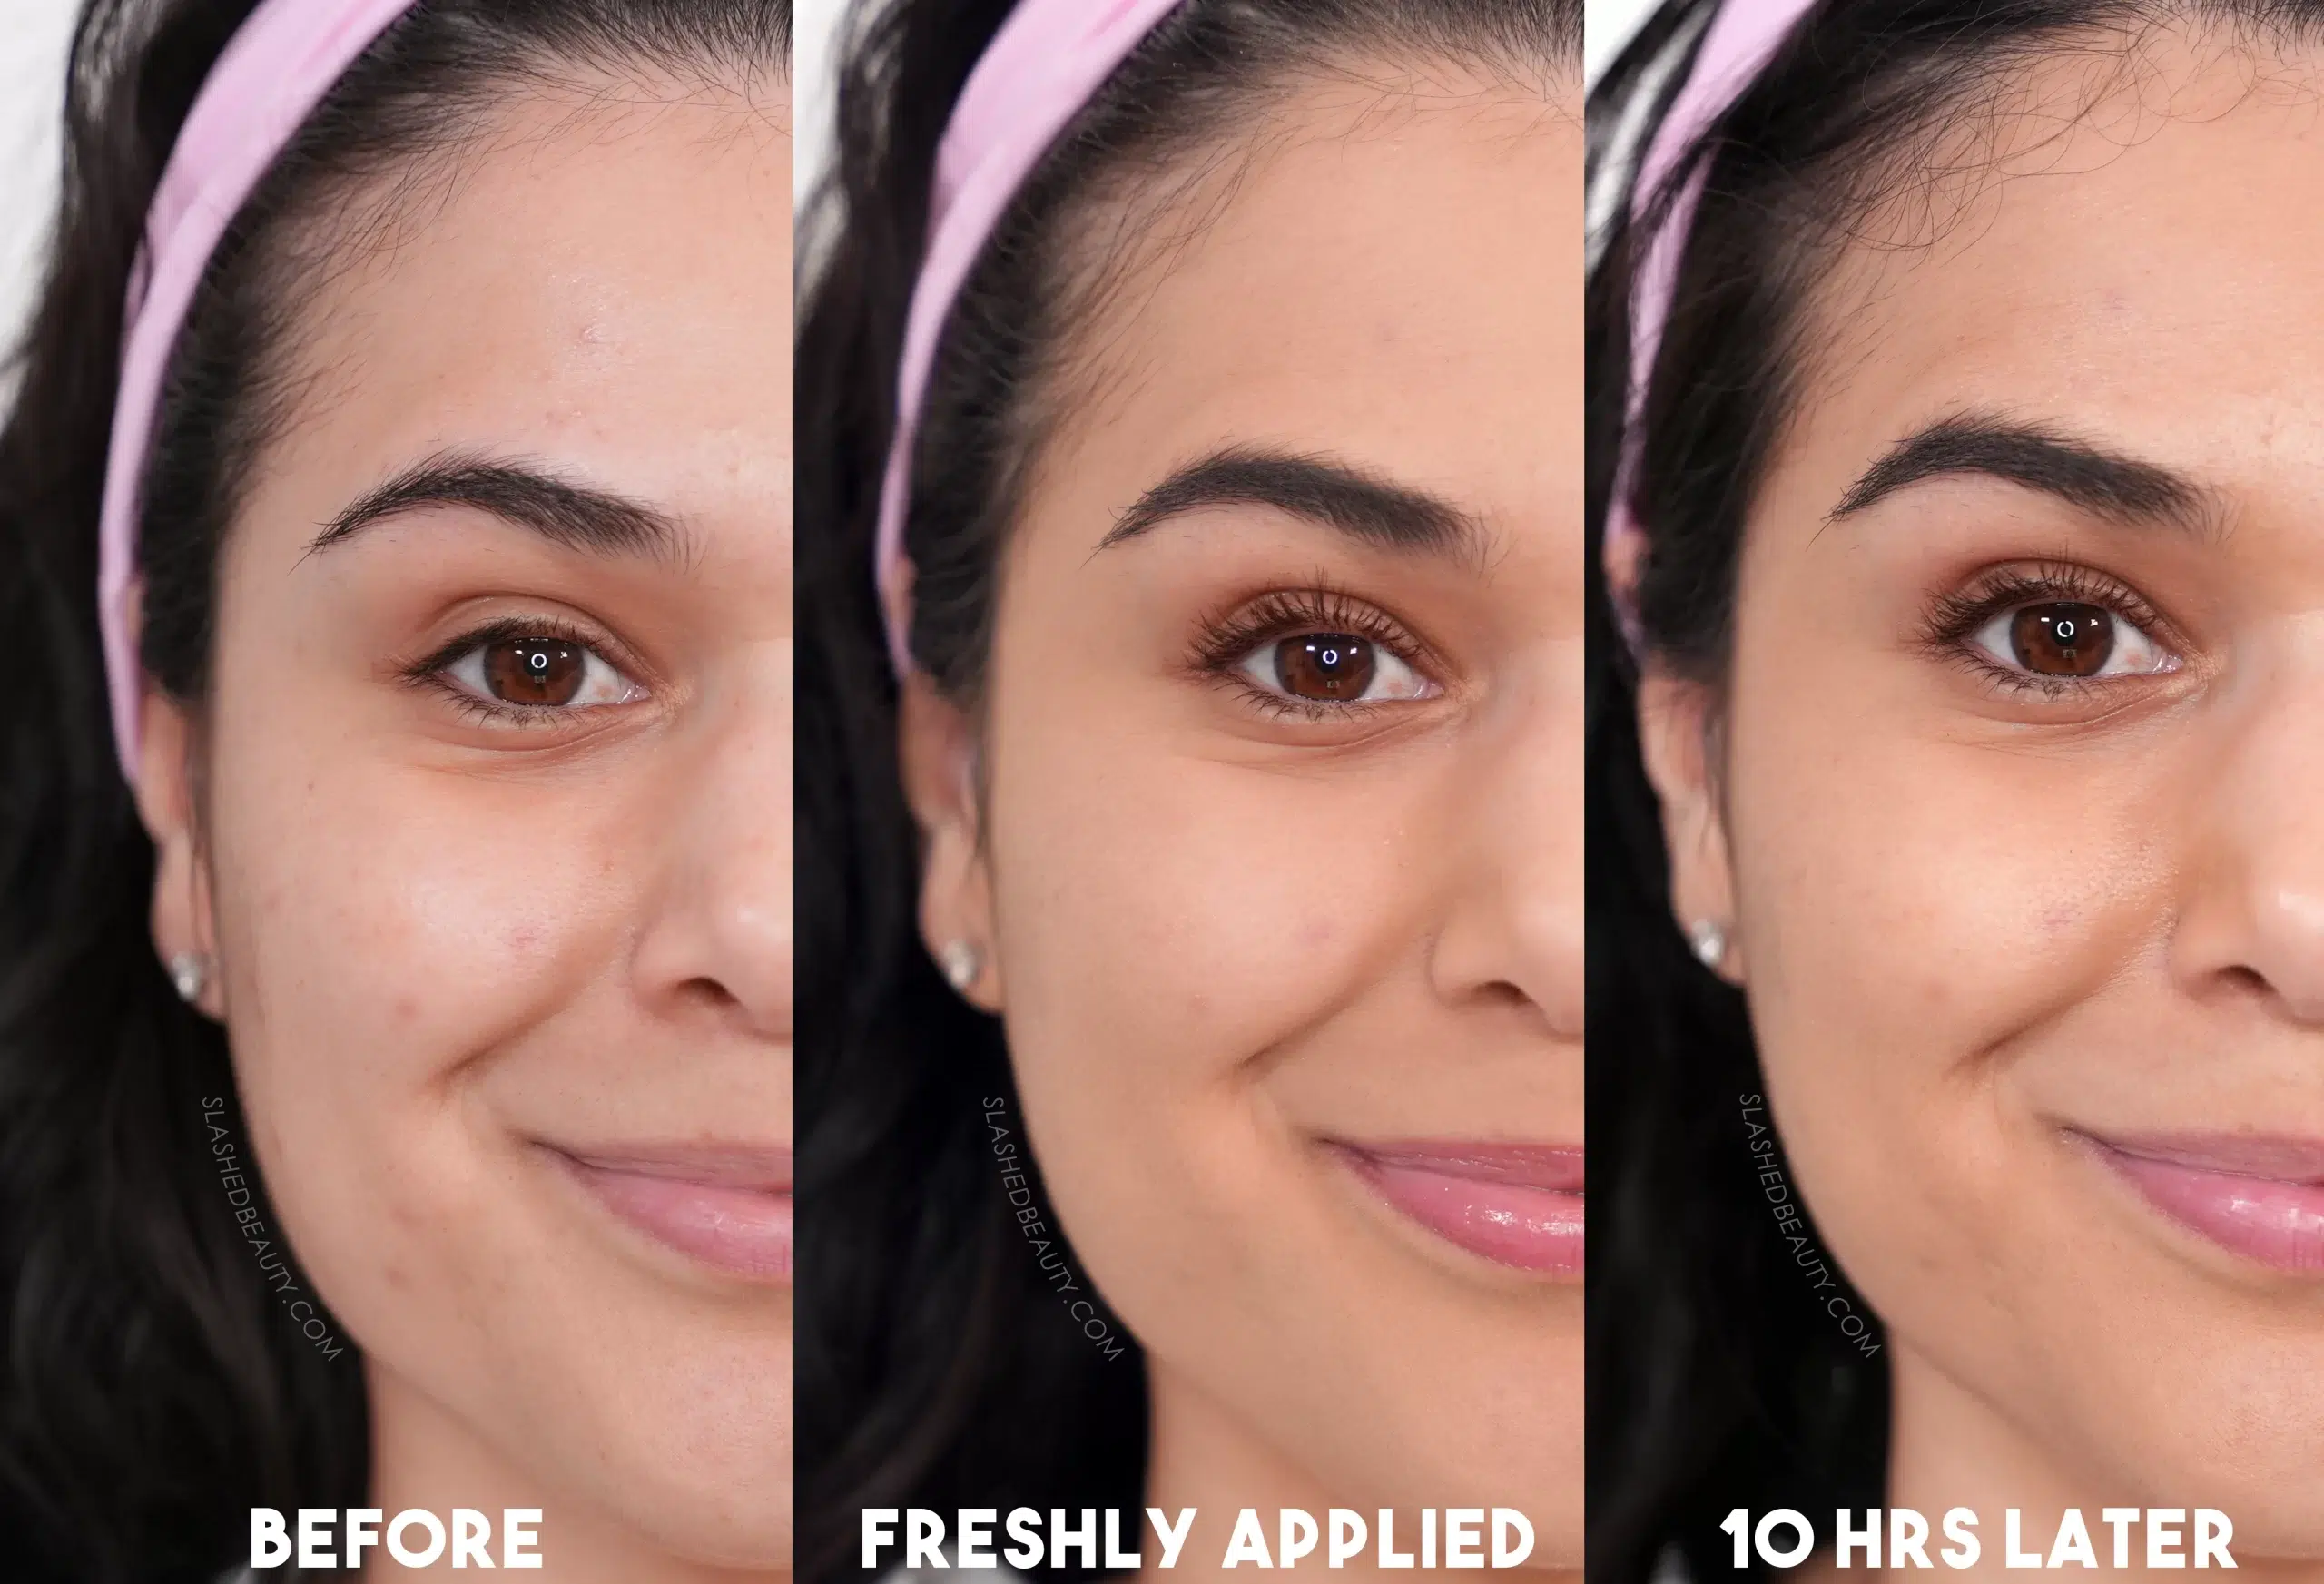 Side by side comparison of bare face next to Maybelline Super Stay Powder Foundation freshly applied, then 10 hours later. | Top 4 Drugstore Powder Foundations Tested Before & After | Slashed Beauty